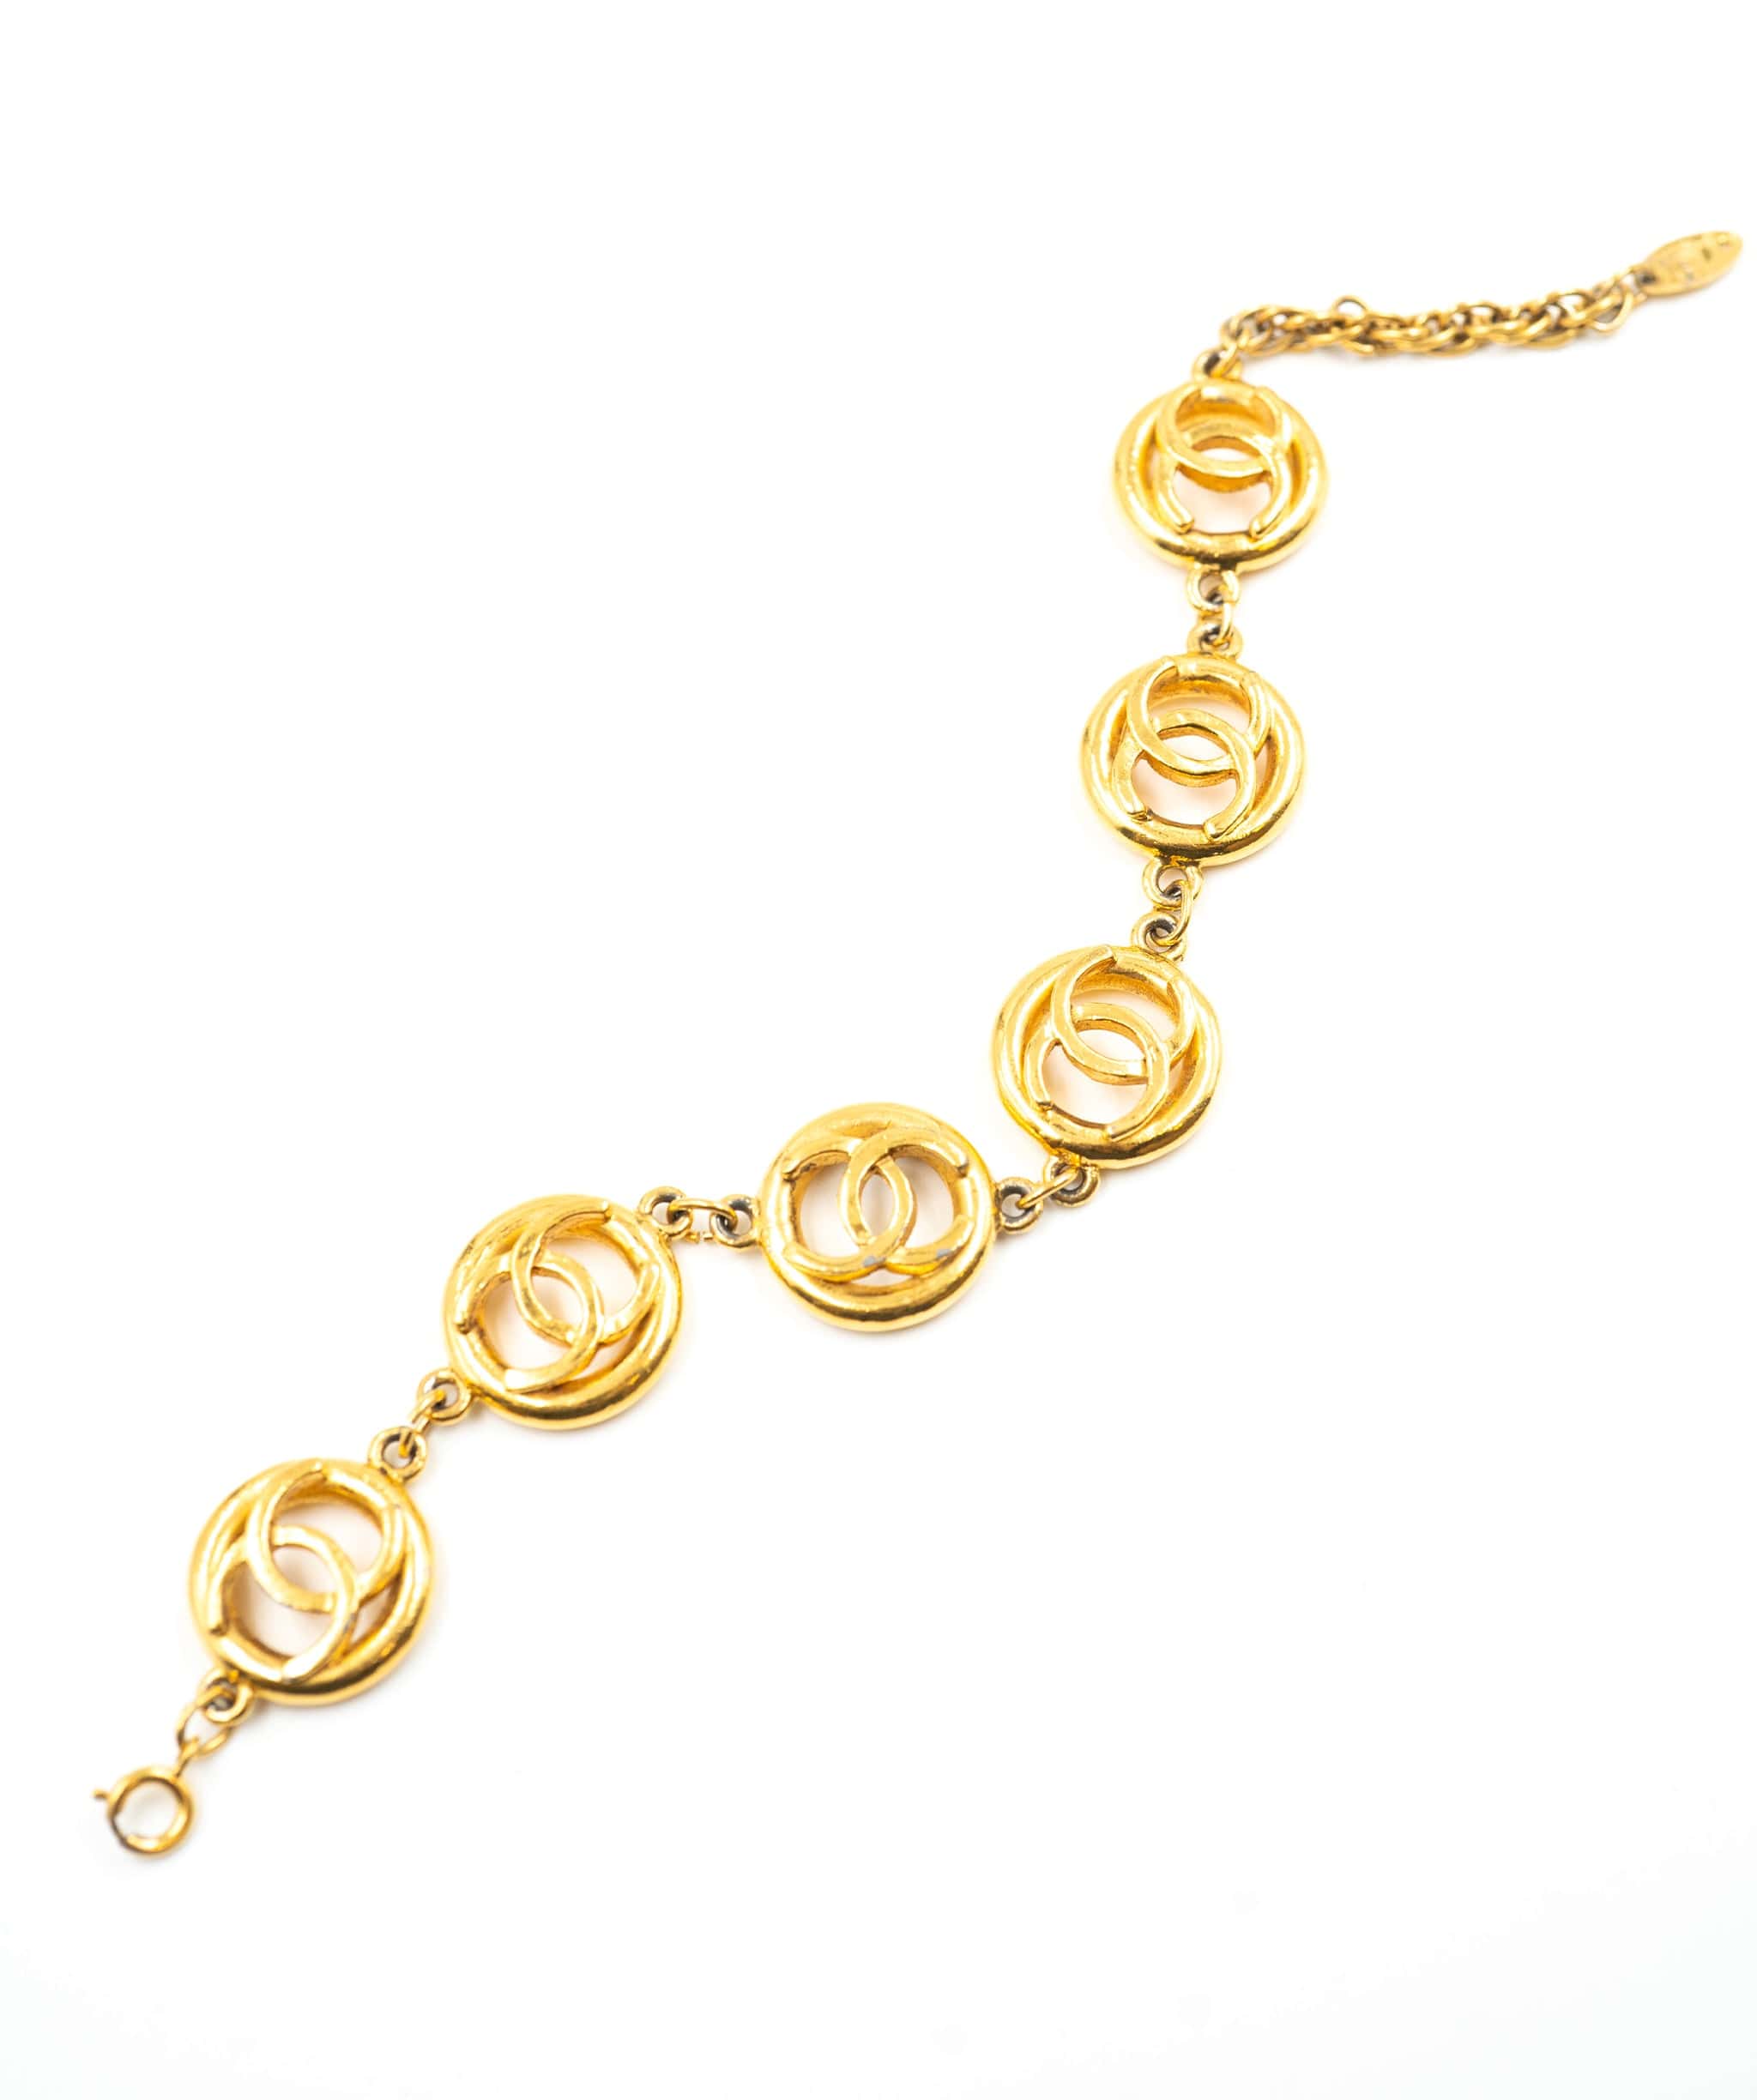 Chanel Chanel CC in circles gold plated bracelet 1982 - ASL3996